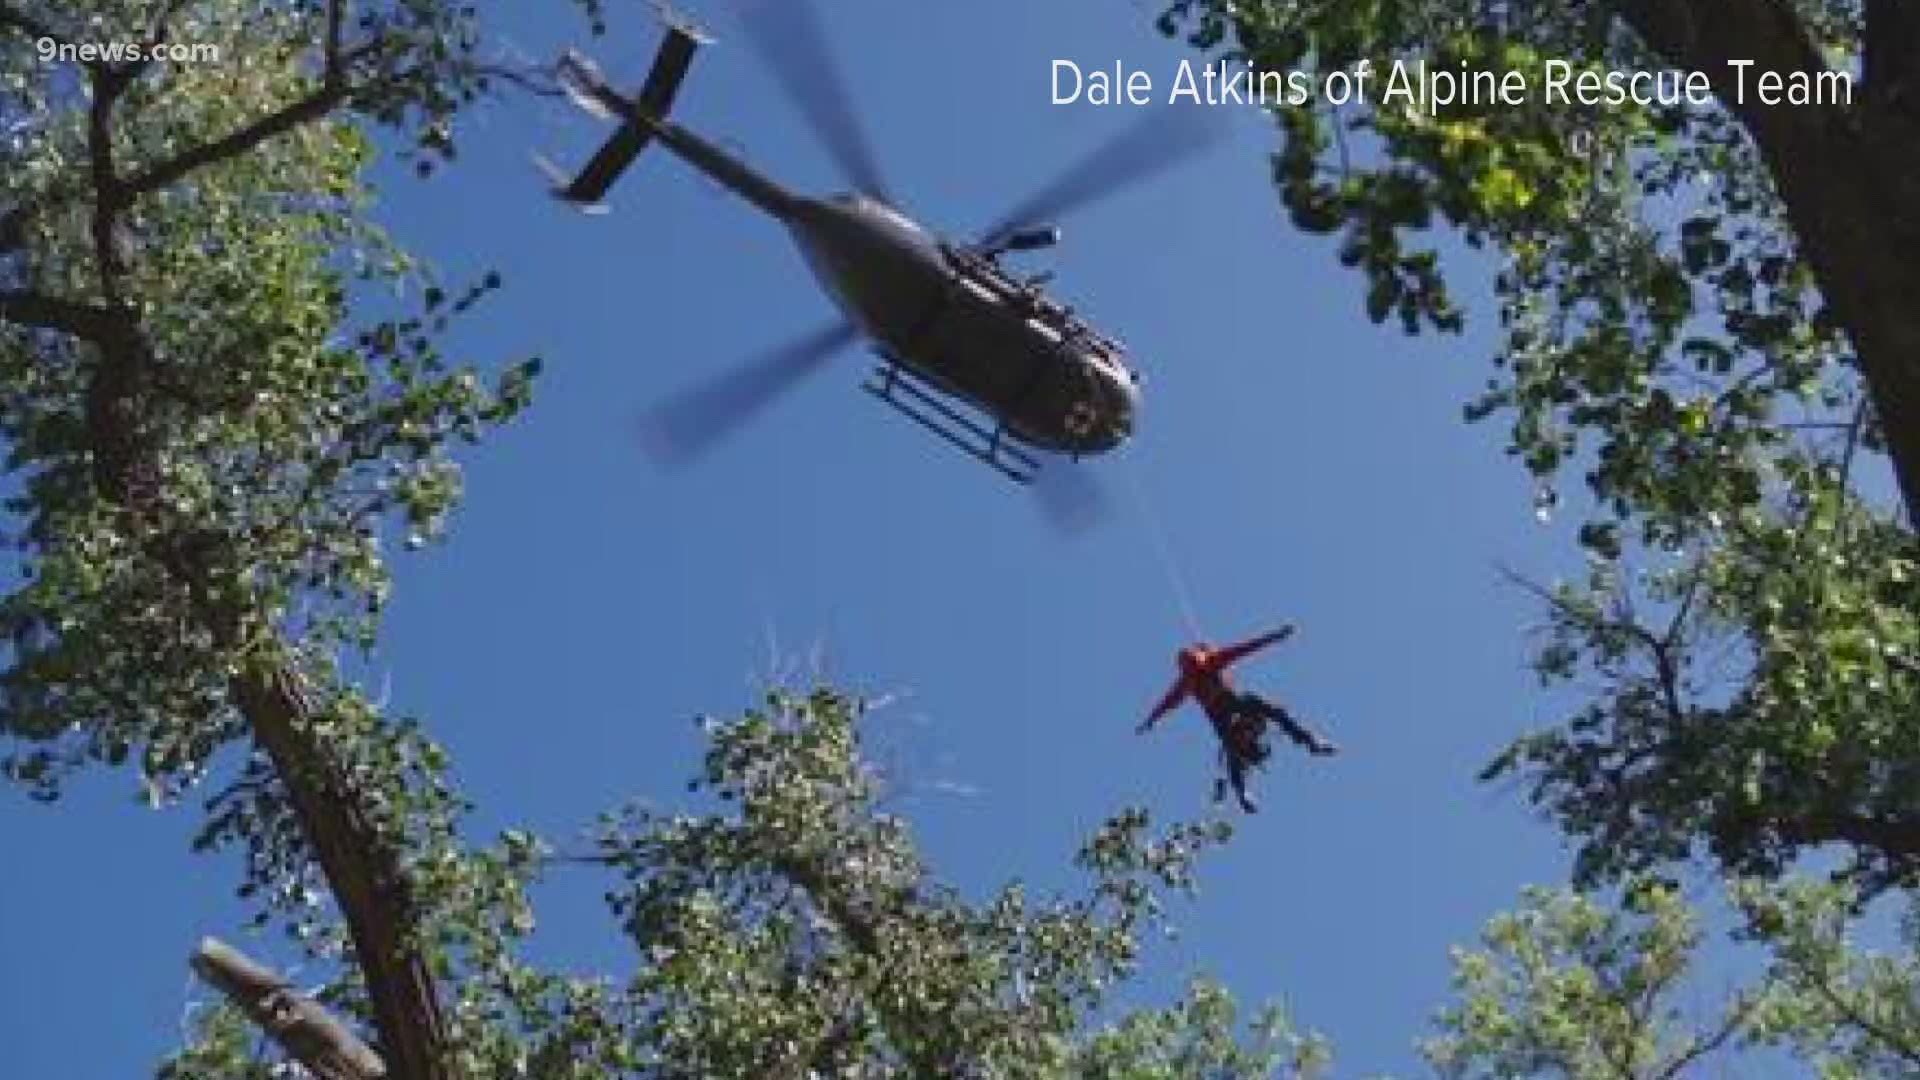 A backpacker surrounded by the Cameron Peak Fire was airlifted from the fire Tuesday afternoon by a Colorado National Guard helicopter.